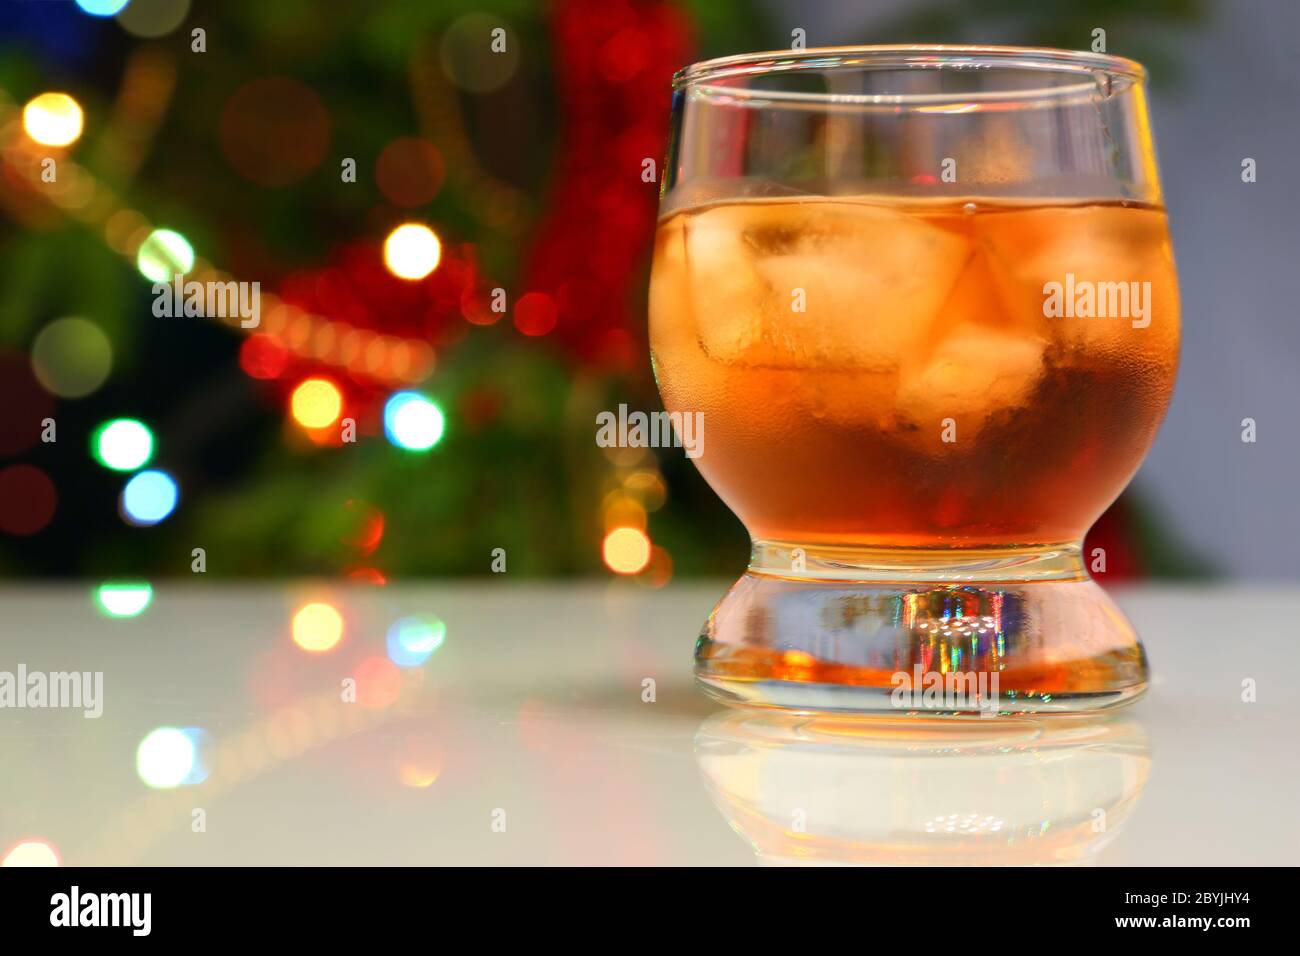 whiskey with ice against festive lights background Stock Photo